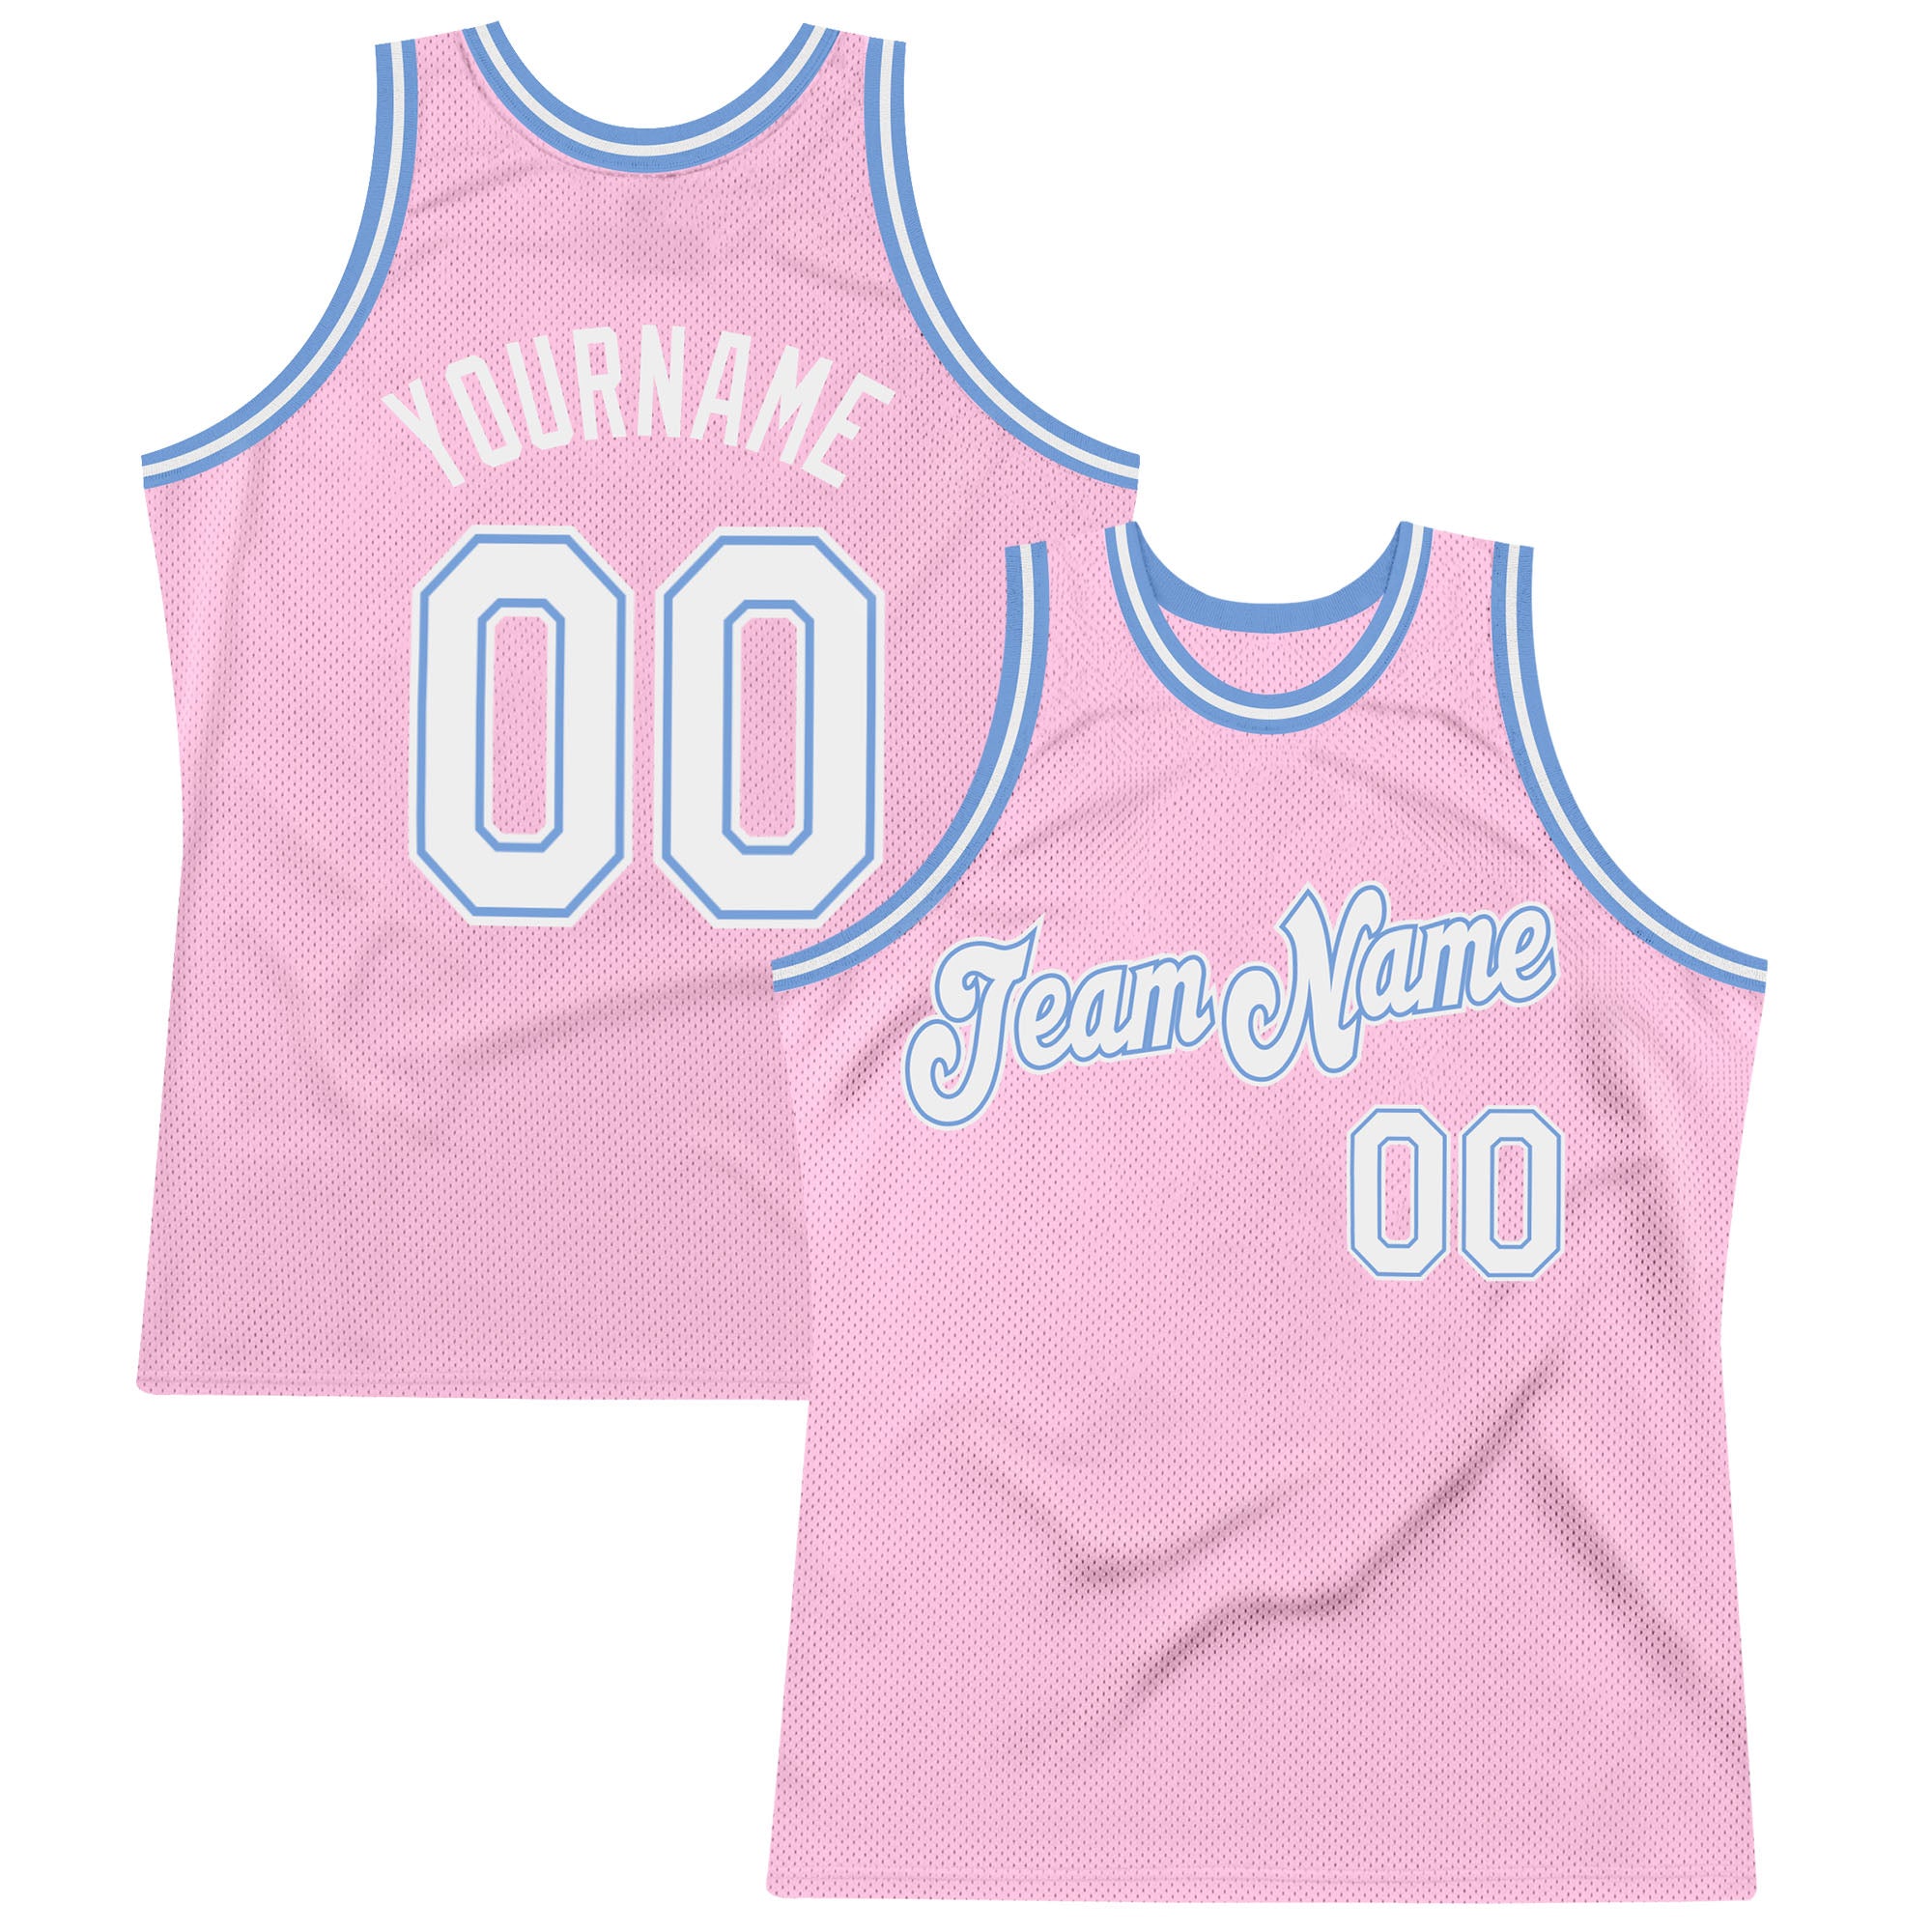 Custom Light Blue White-Red Authentic Fade Fashion Basketball Jersey  Discount